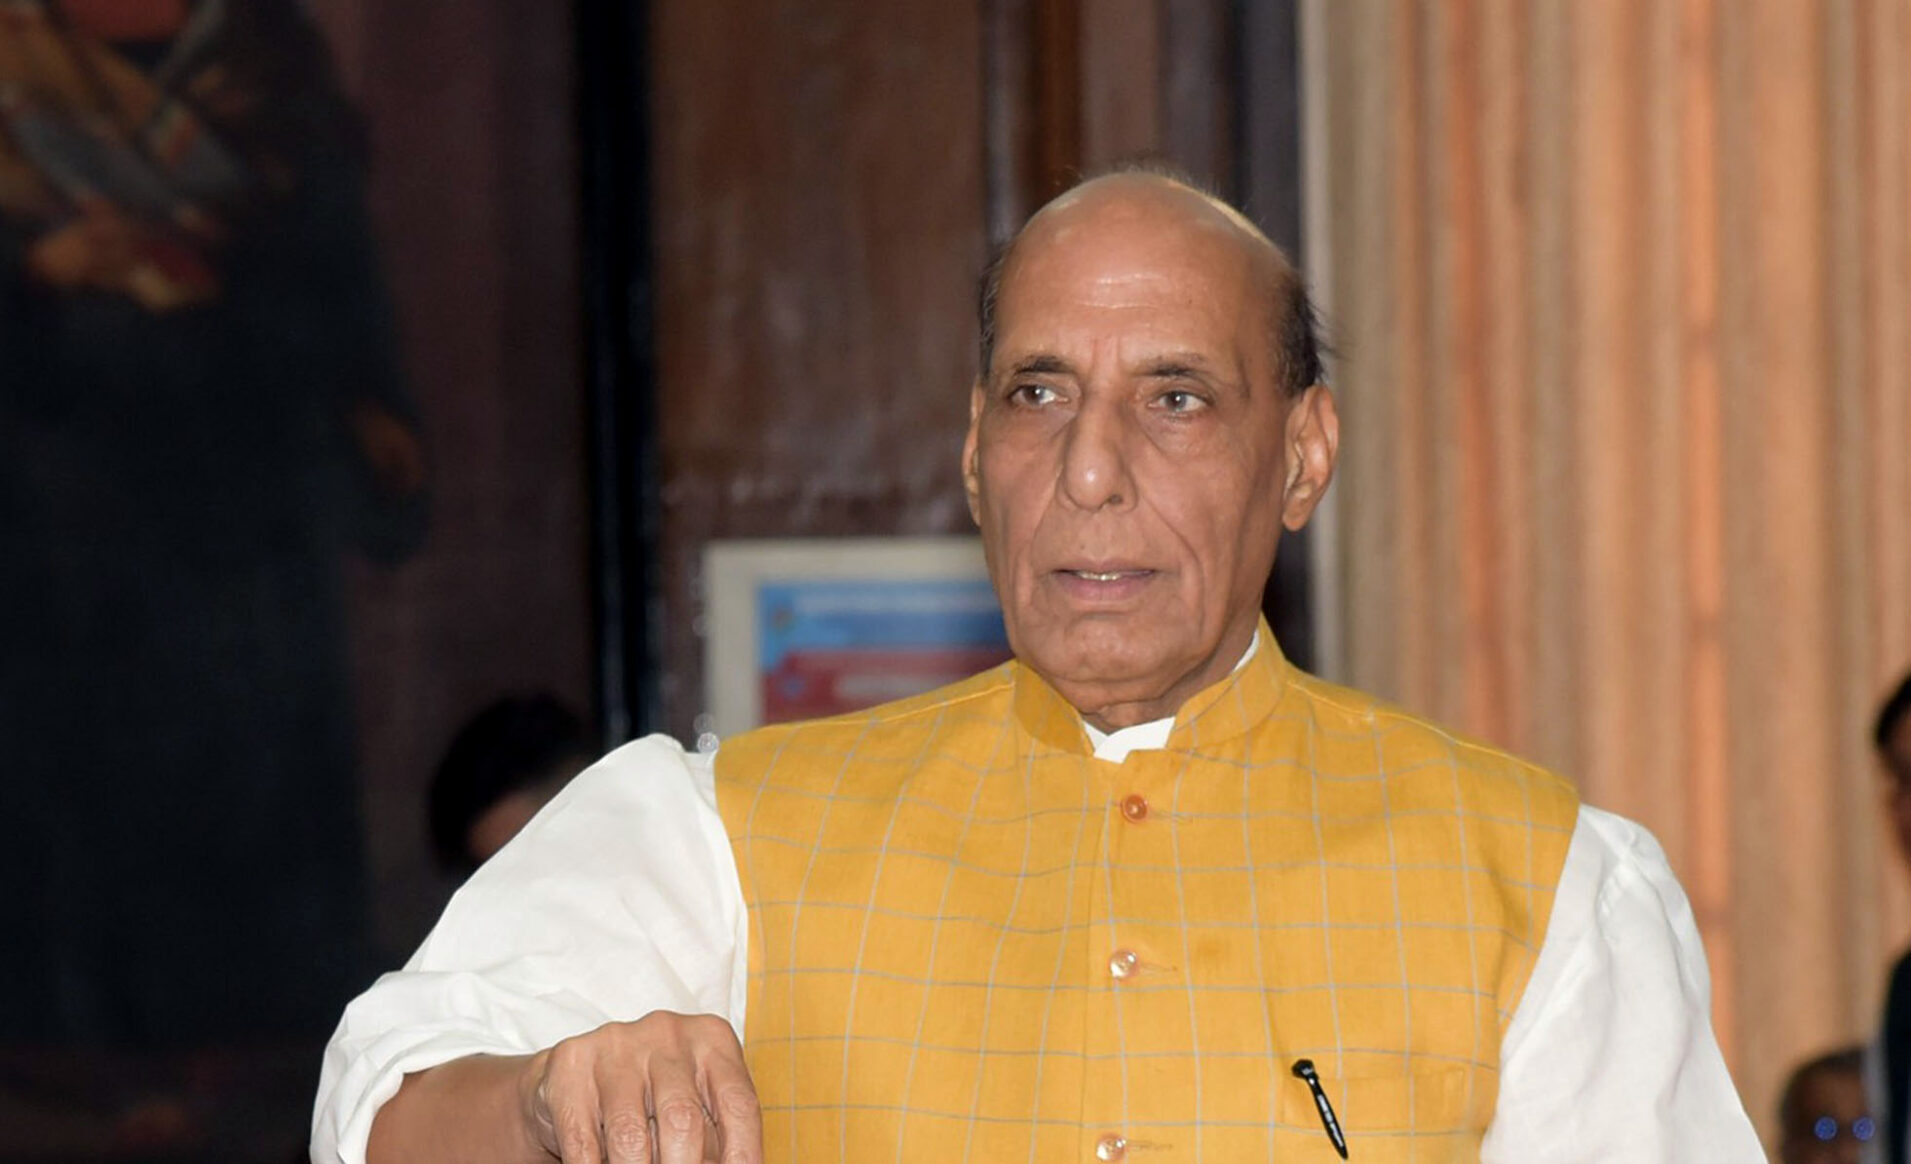 India-US Cooperation: A Force Multiplier For A Rules-Based World Order, Says Rajnath Singh